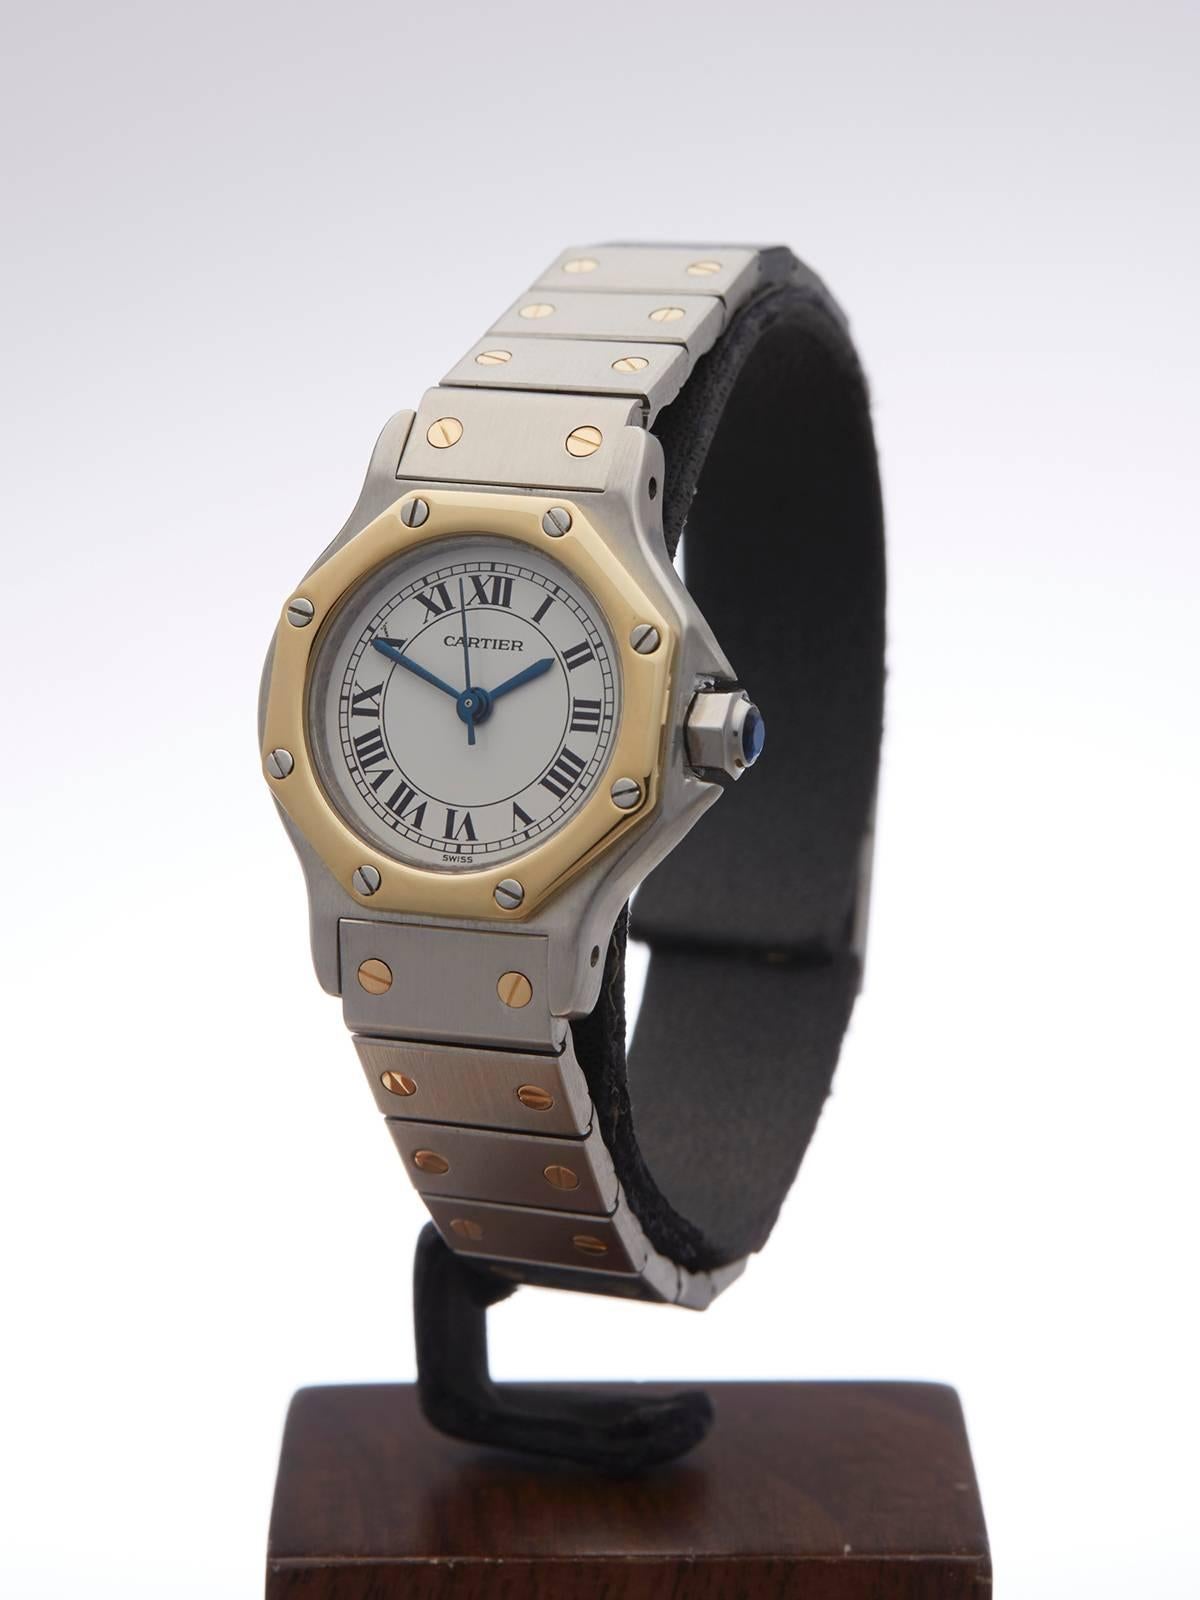 REF	W3129
MODEL NUMBER	187902
SERIAL NUMBER	B00******
CONDITION	9 - Excellent condition
GENDER	Ladies
AGE	1990's
CASE DIAMETER	24 mm
CASE SIZE	24mm by 33mm
BOX & PAPERS	Box Only
MOVEMENT	Automatic
CASE	Stainless Steel/18k Yellow